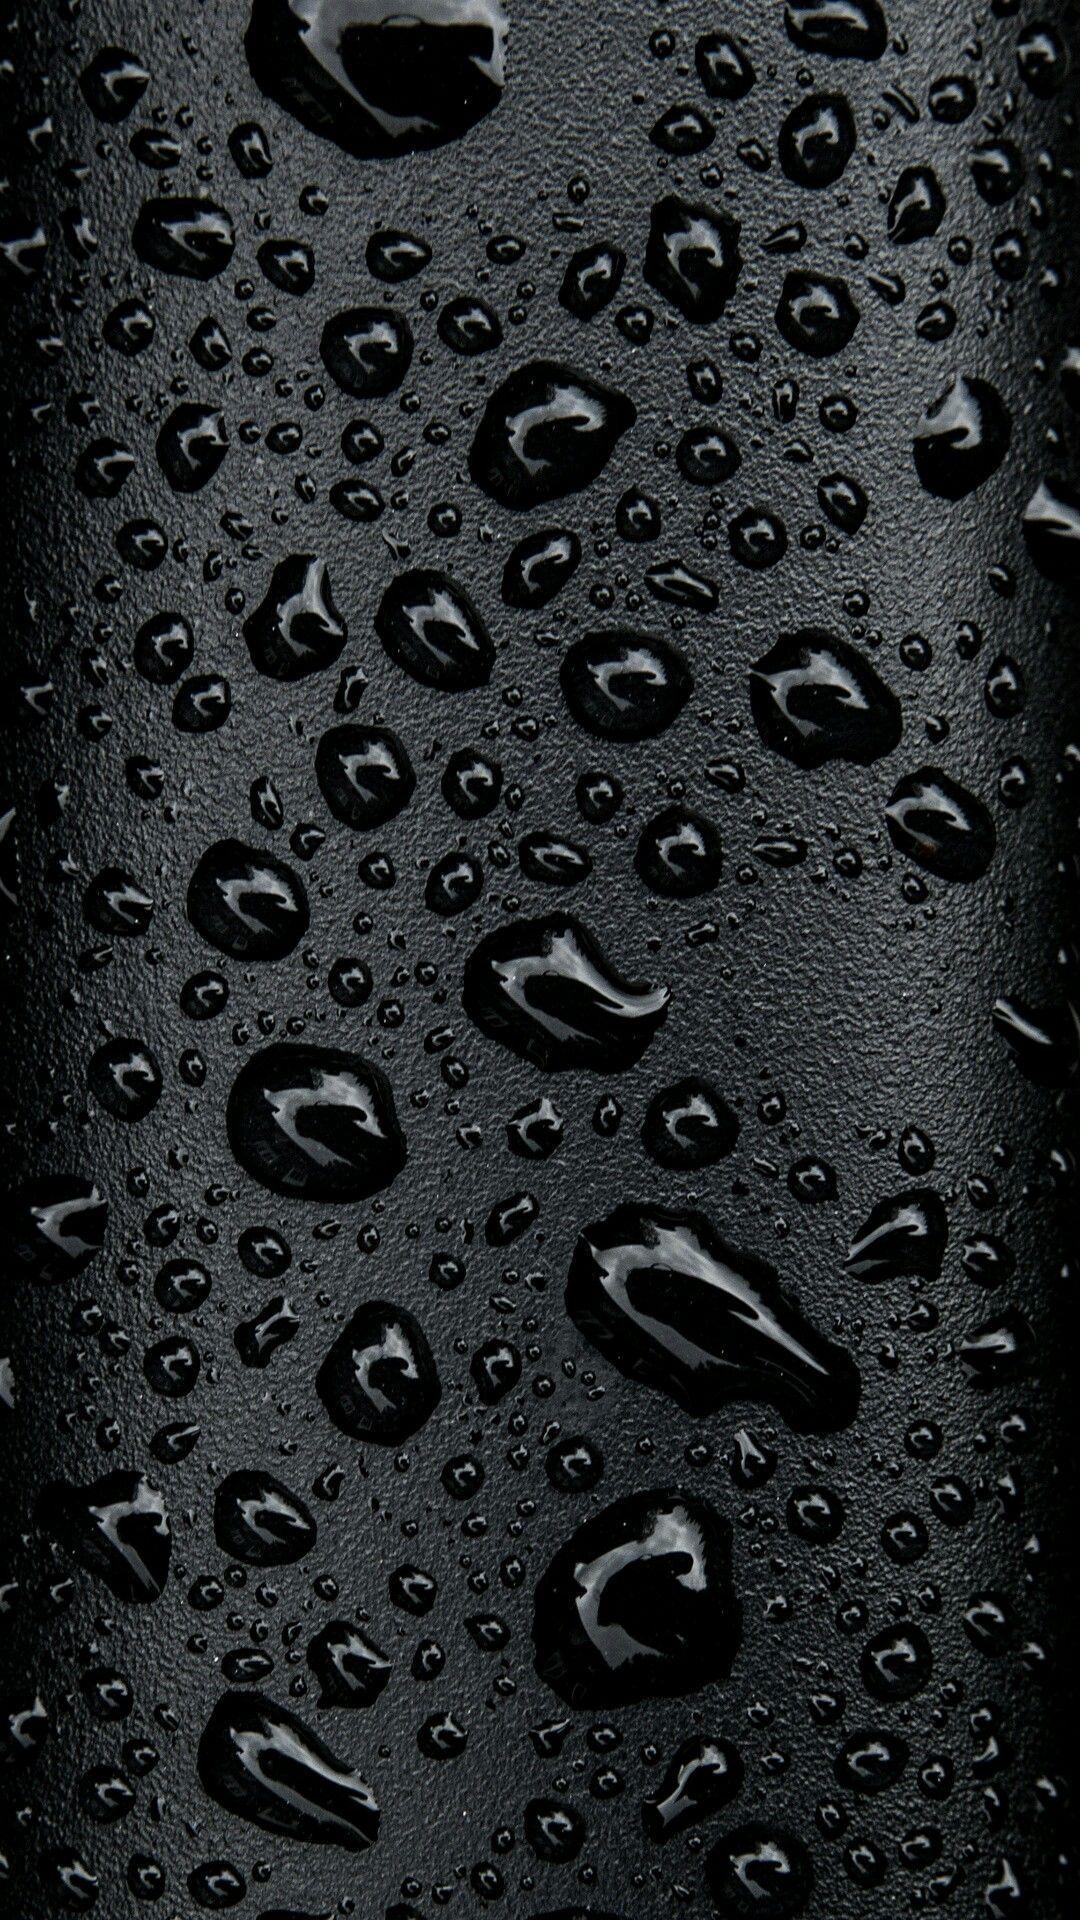 Black Water Droplets. Wallpaper (for phones) ㊗. Galaxy